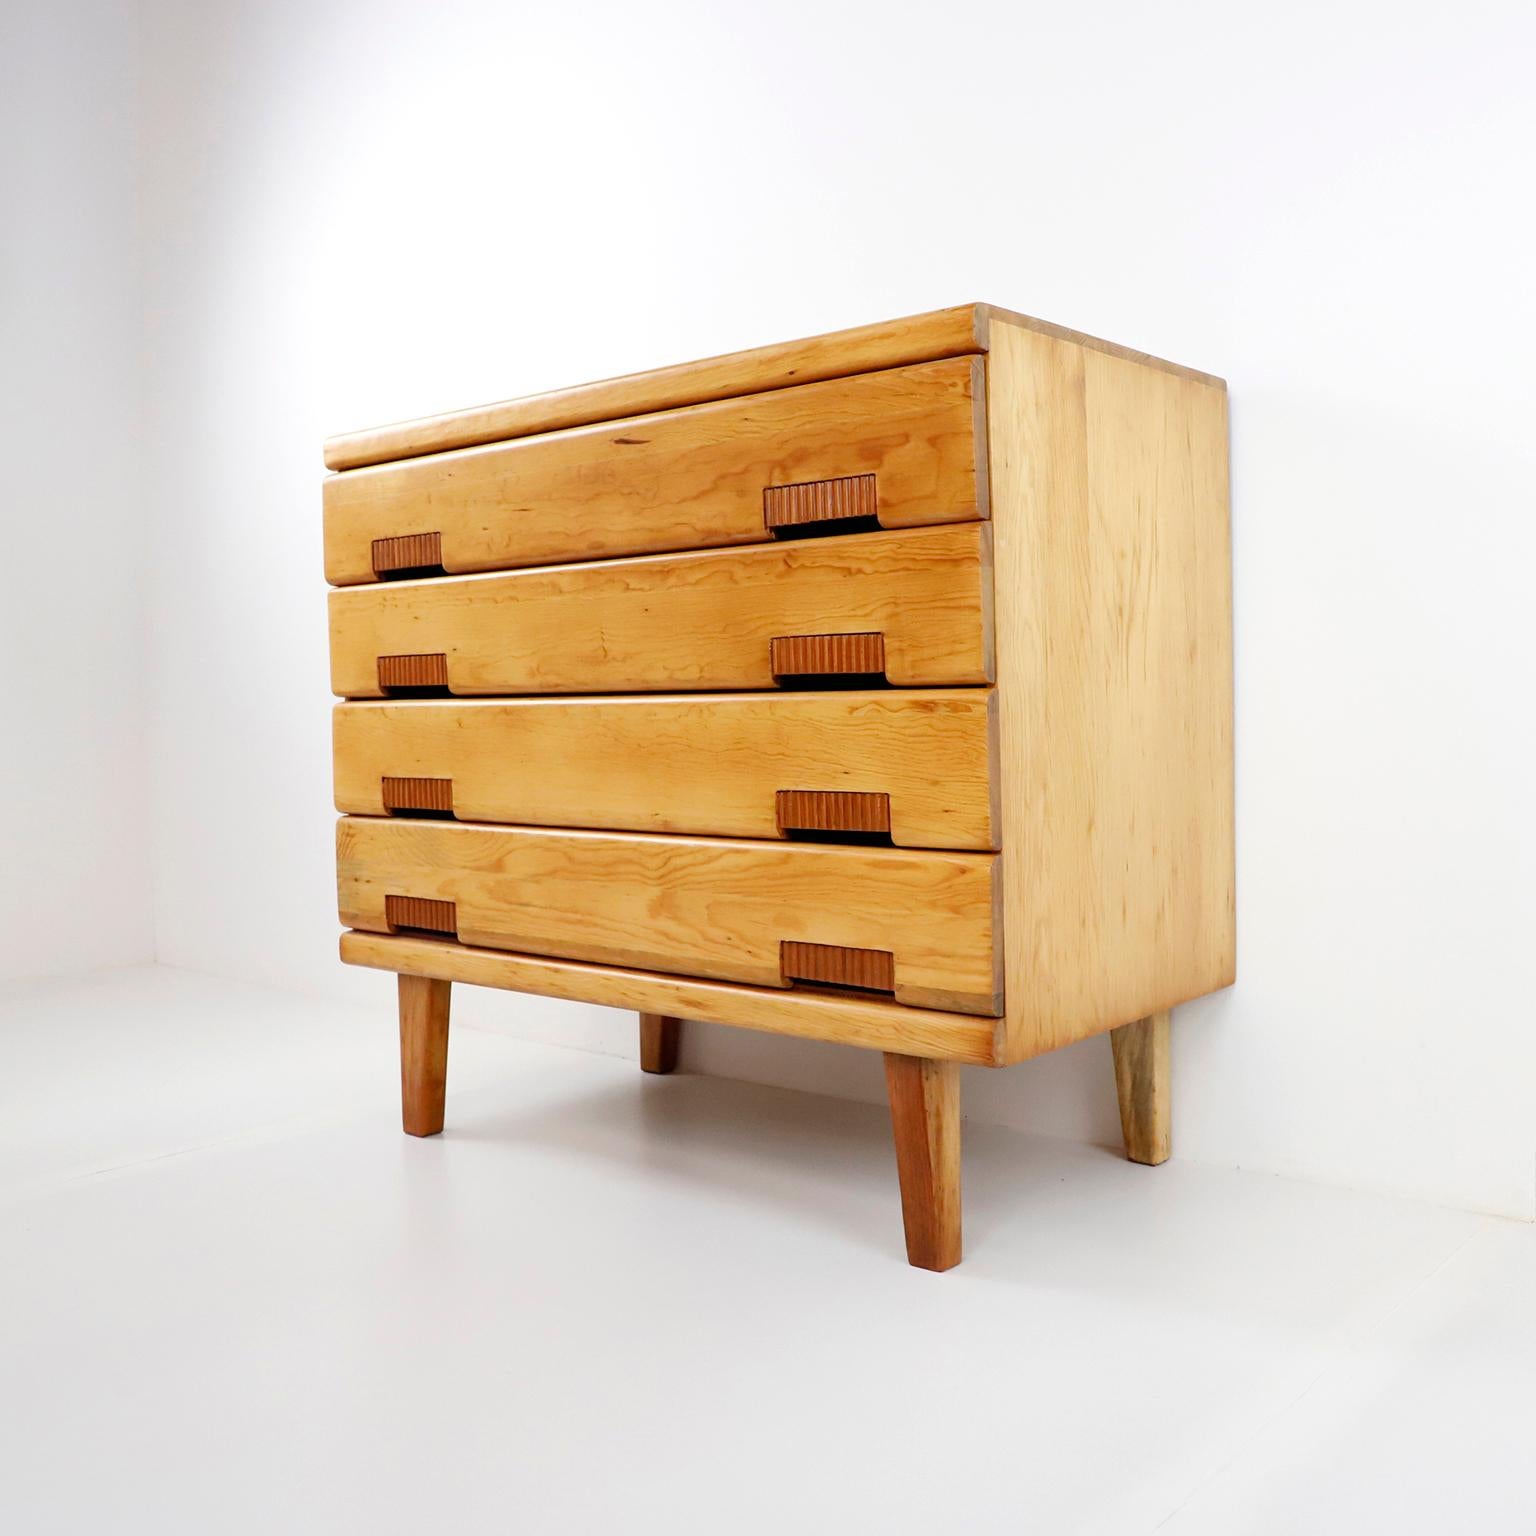 We offer this rare original Domus drawer by Michael Van Beuren in pine wood. Designed by the American Bauhaus designer, Michael Van Beuren in Mexico, circa 1950, handmade in solid pine wood, this drawer was recently restored.

About Michael Van